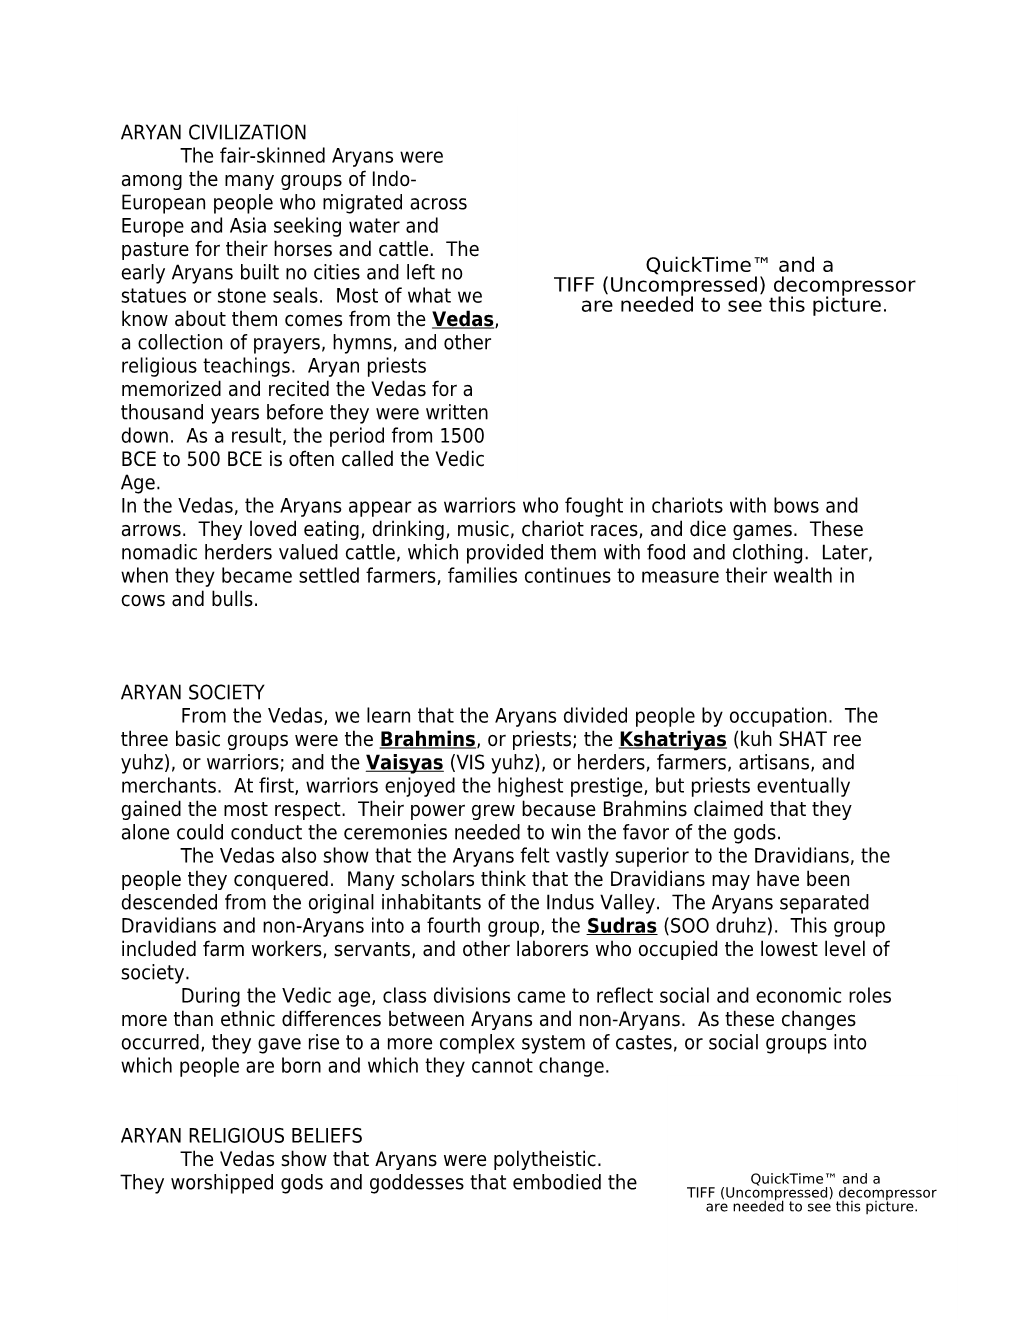 From World History: Connections to Today Pgs- 55, 57, 58 (Looking Ahead)